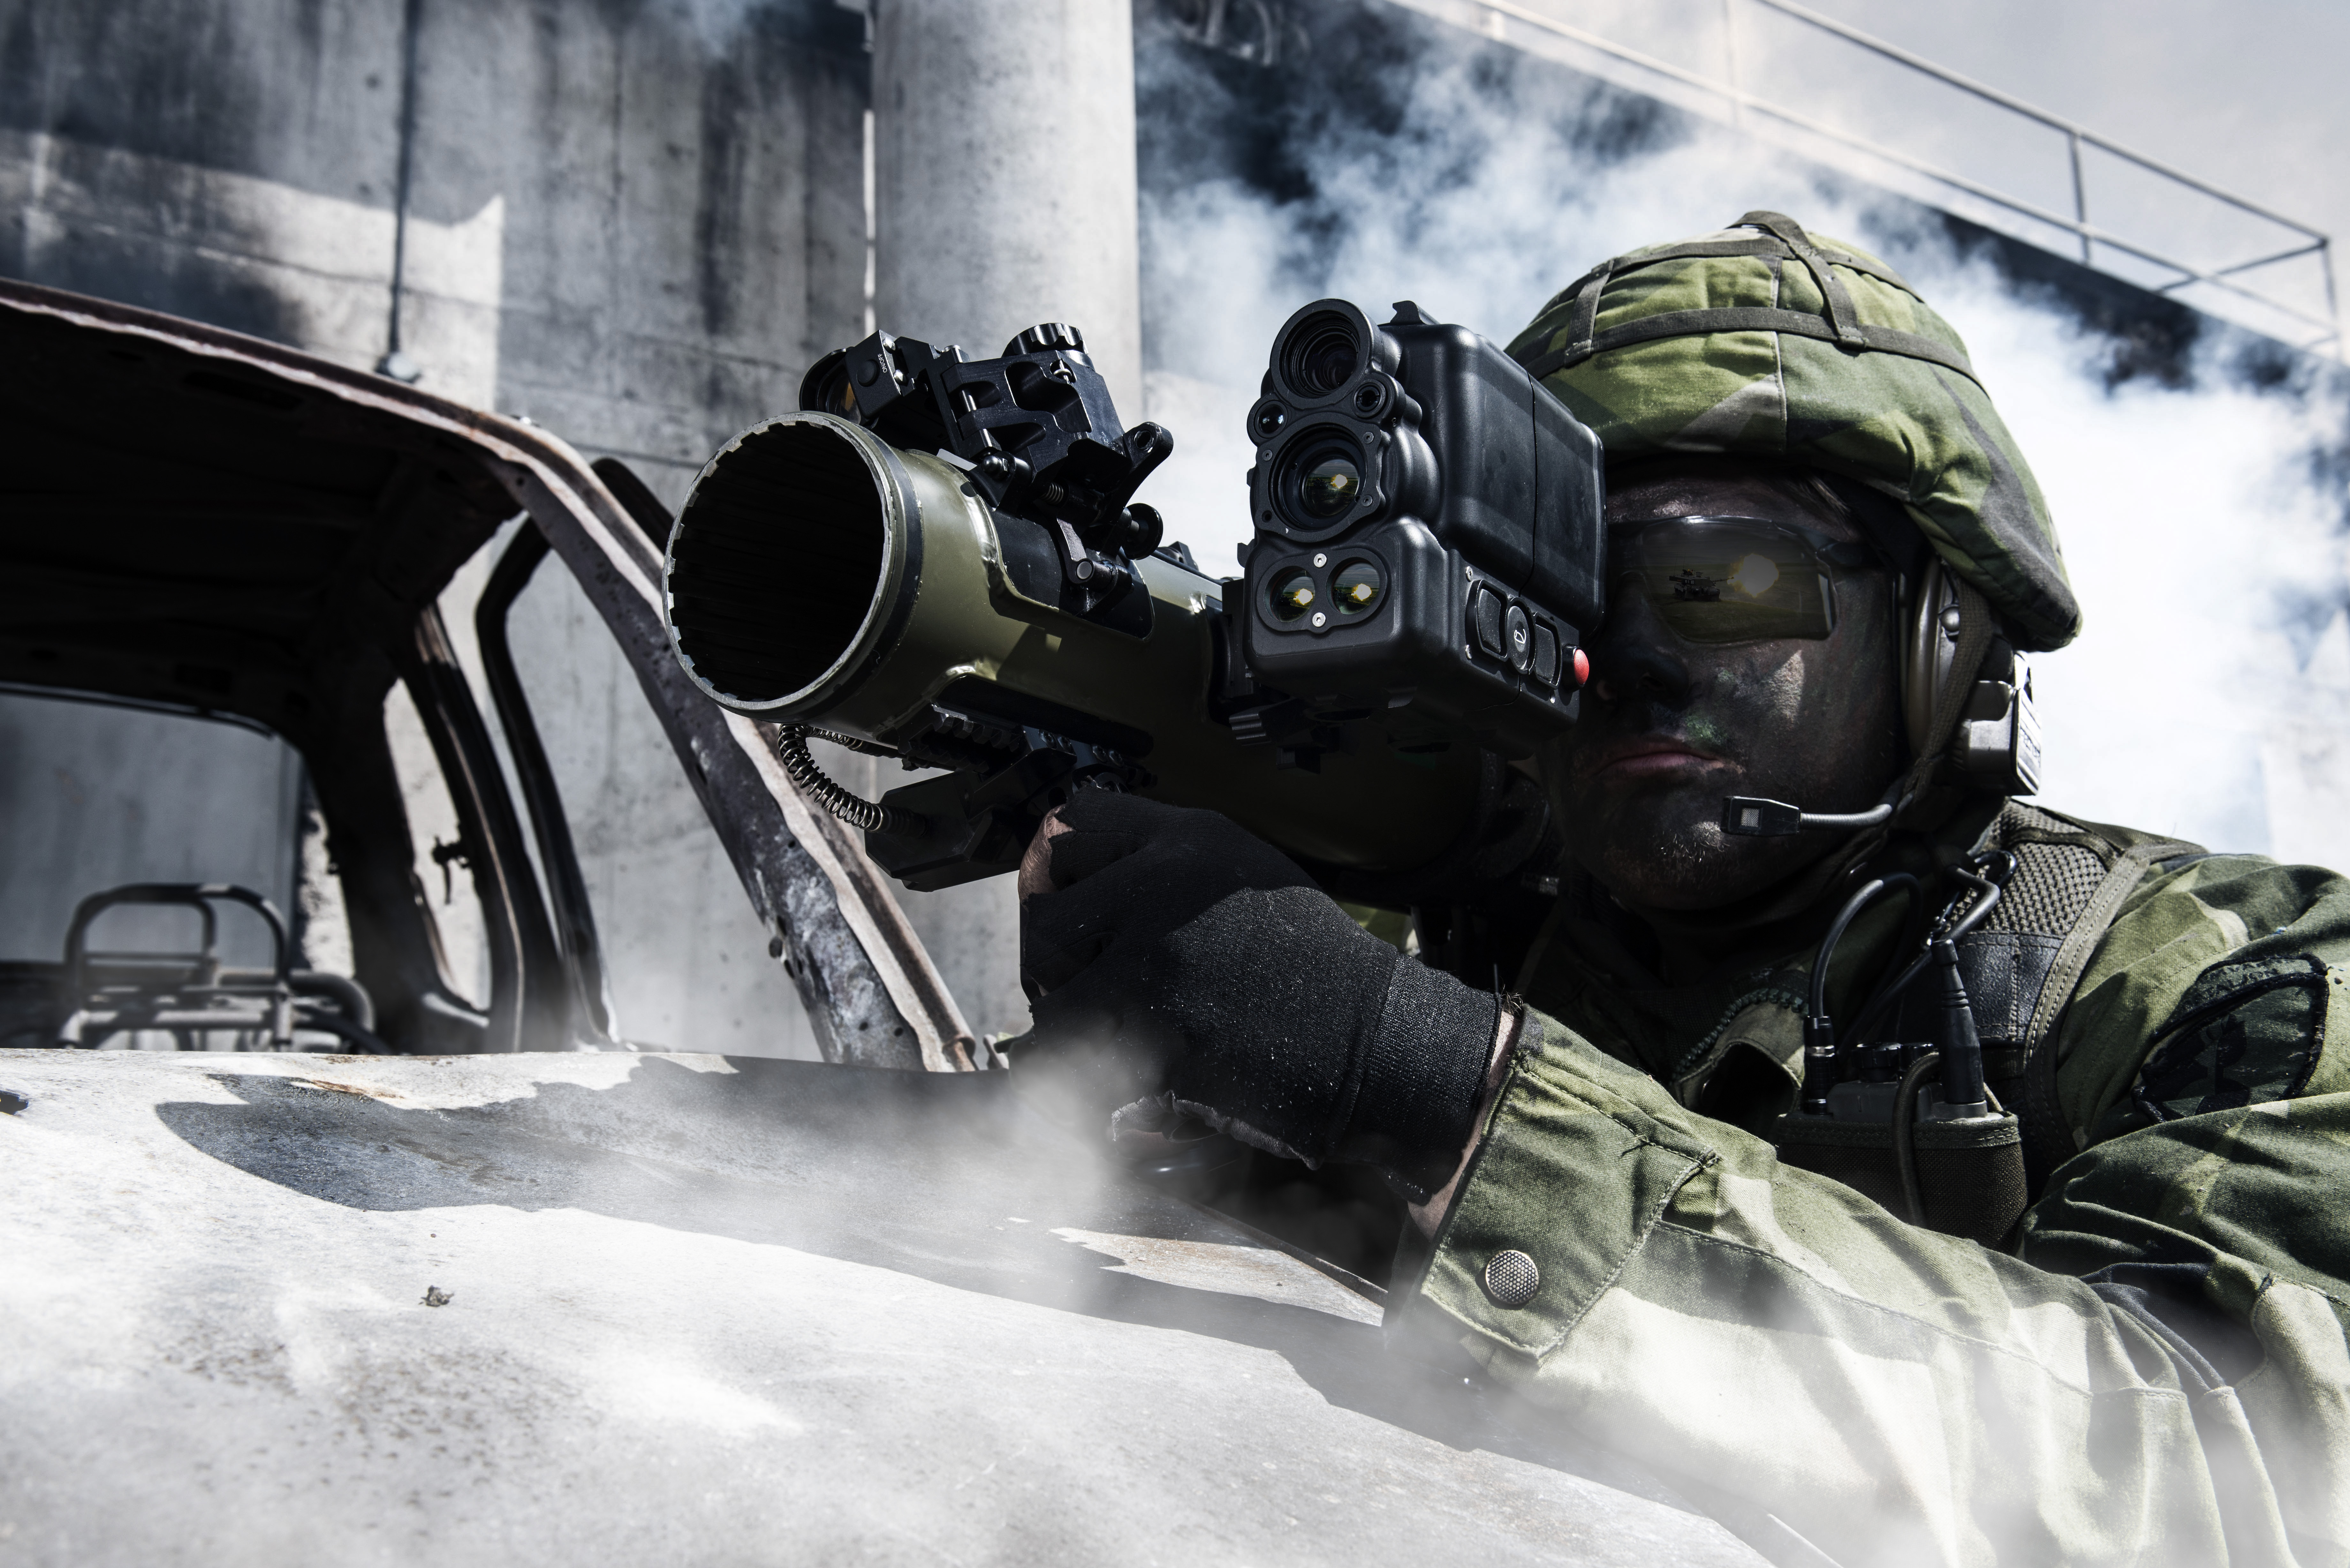 The new Carl-Gustaf M4 is a man-portable multi-role 
weapon system that provides high tactical flexibility 
through its wide range of ammunition types